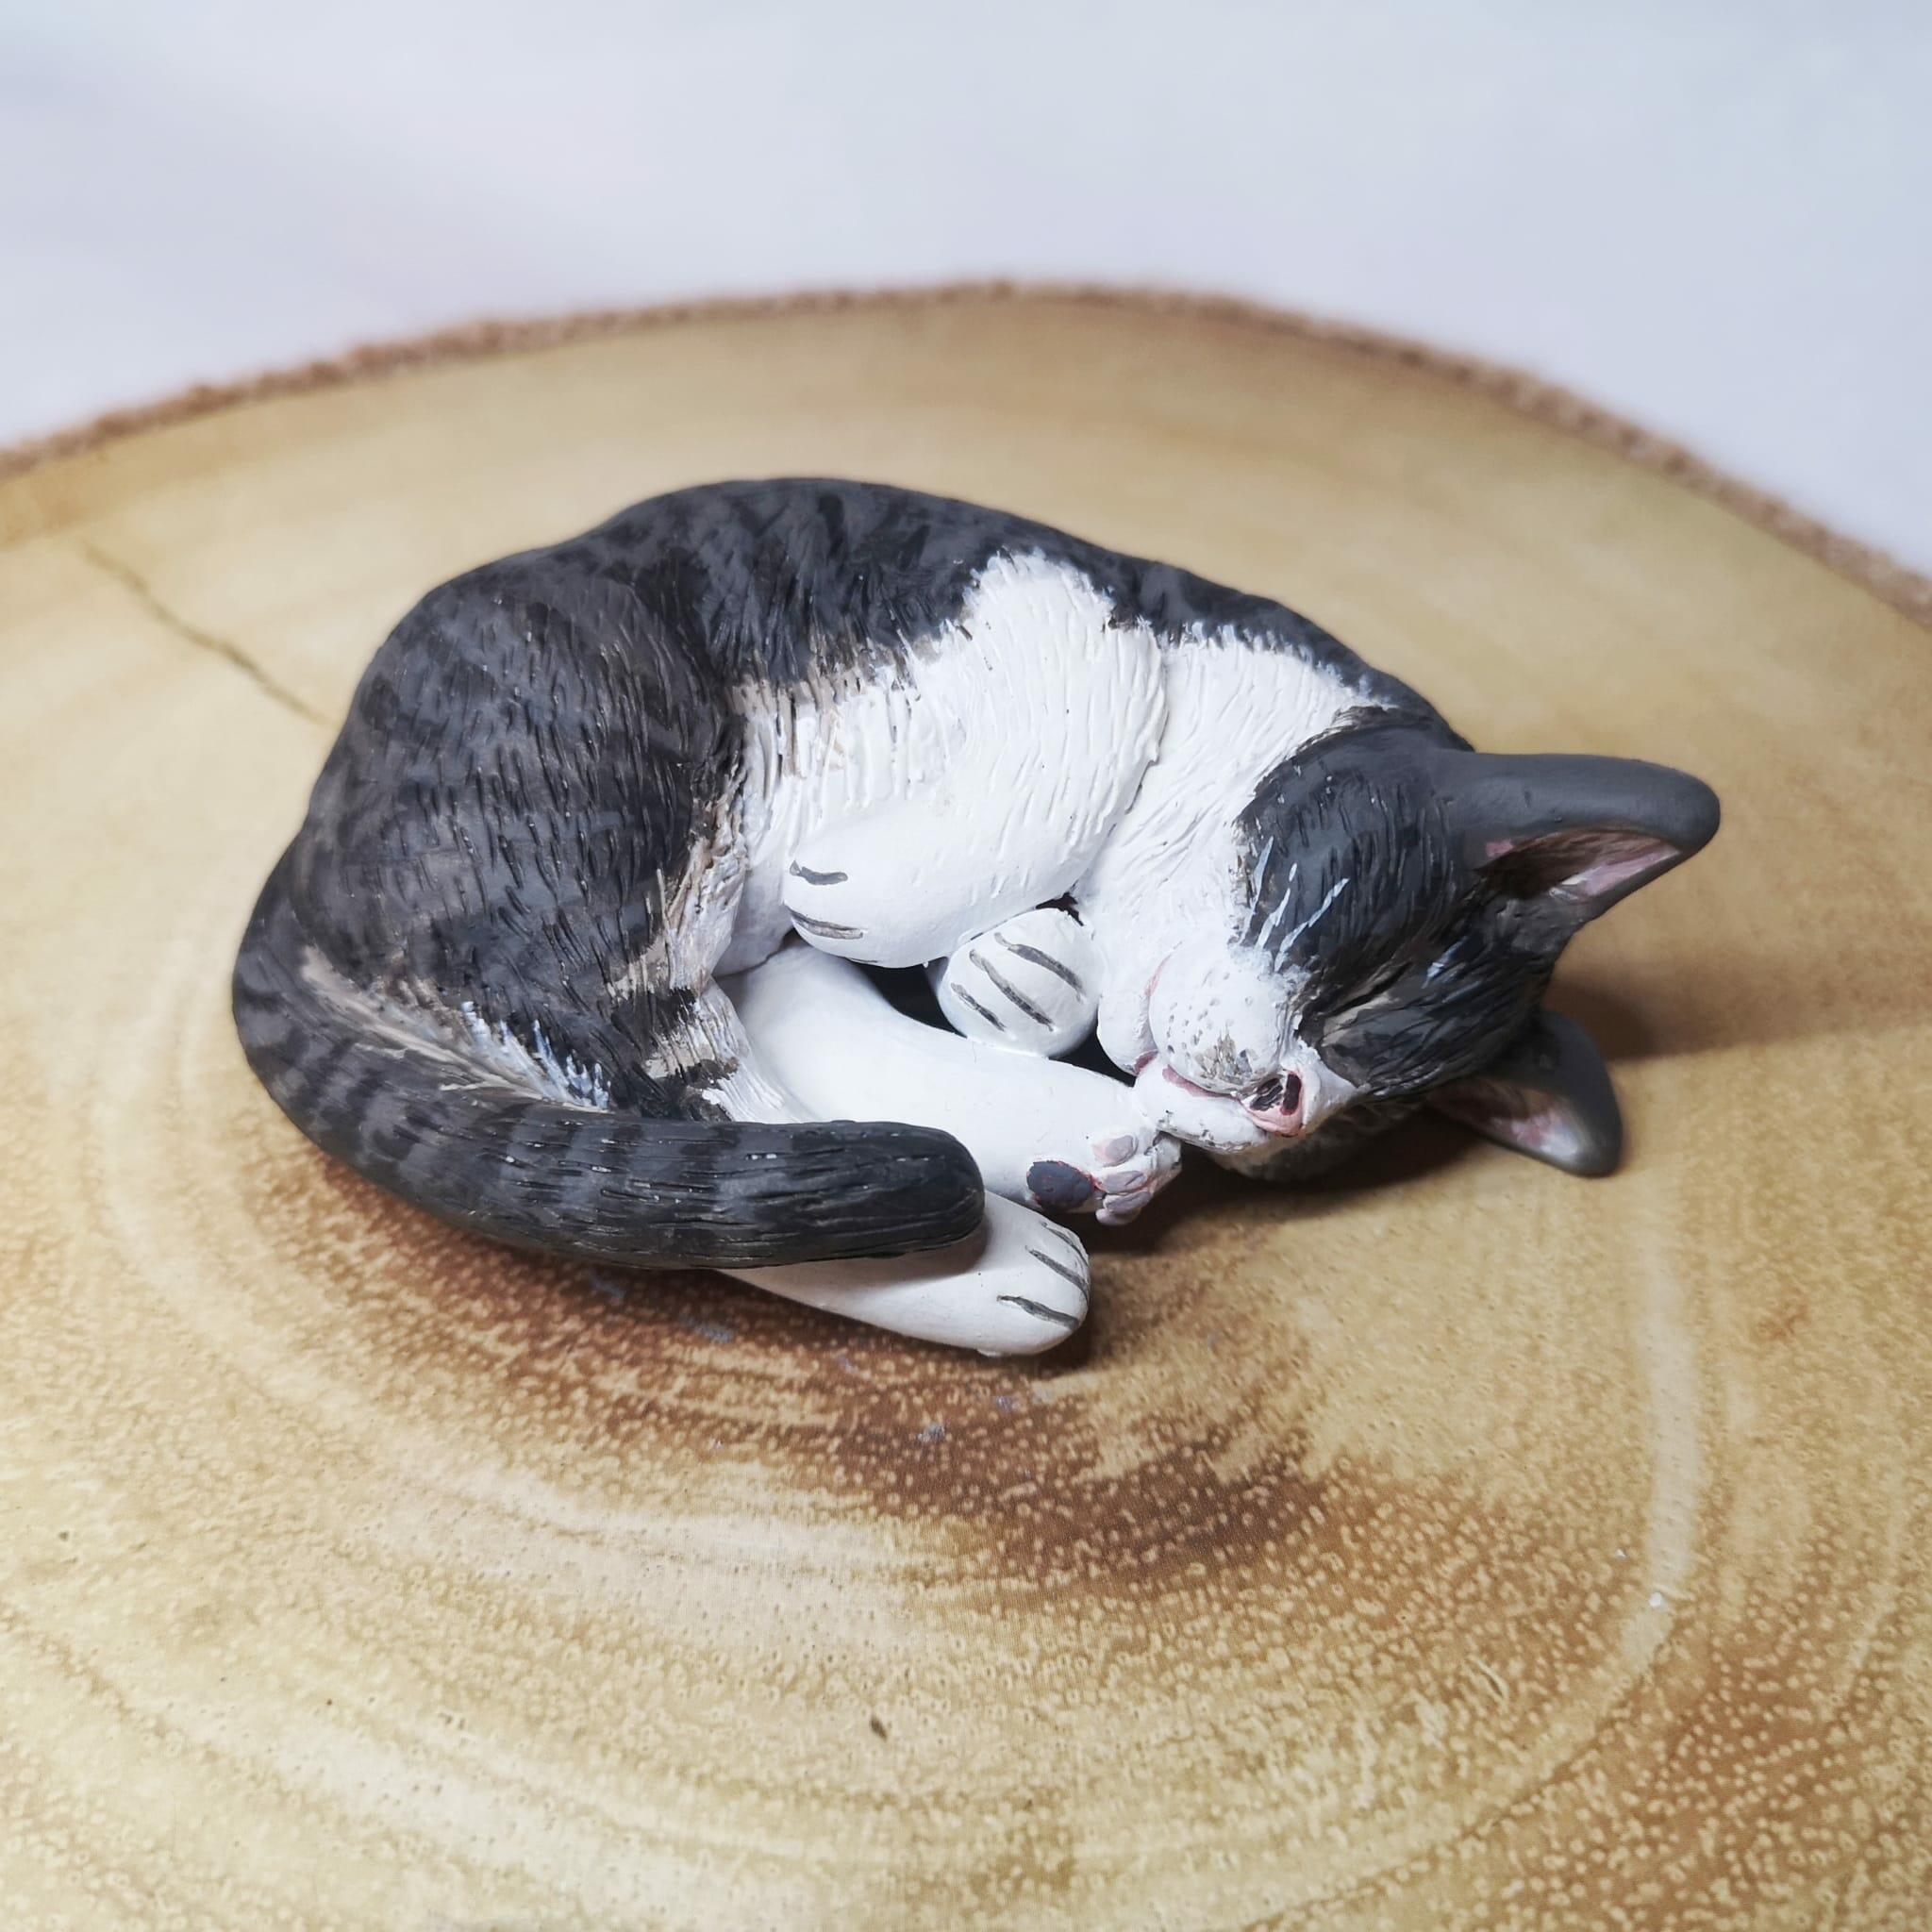 Handmade and handpainted clay model of a sleeping cat, crafted with love and attention to detail, showcasing the peaceful and serene state of your feline friend.